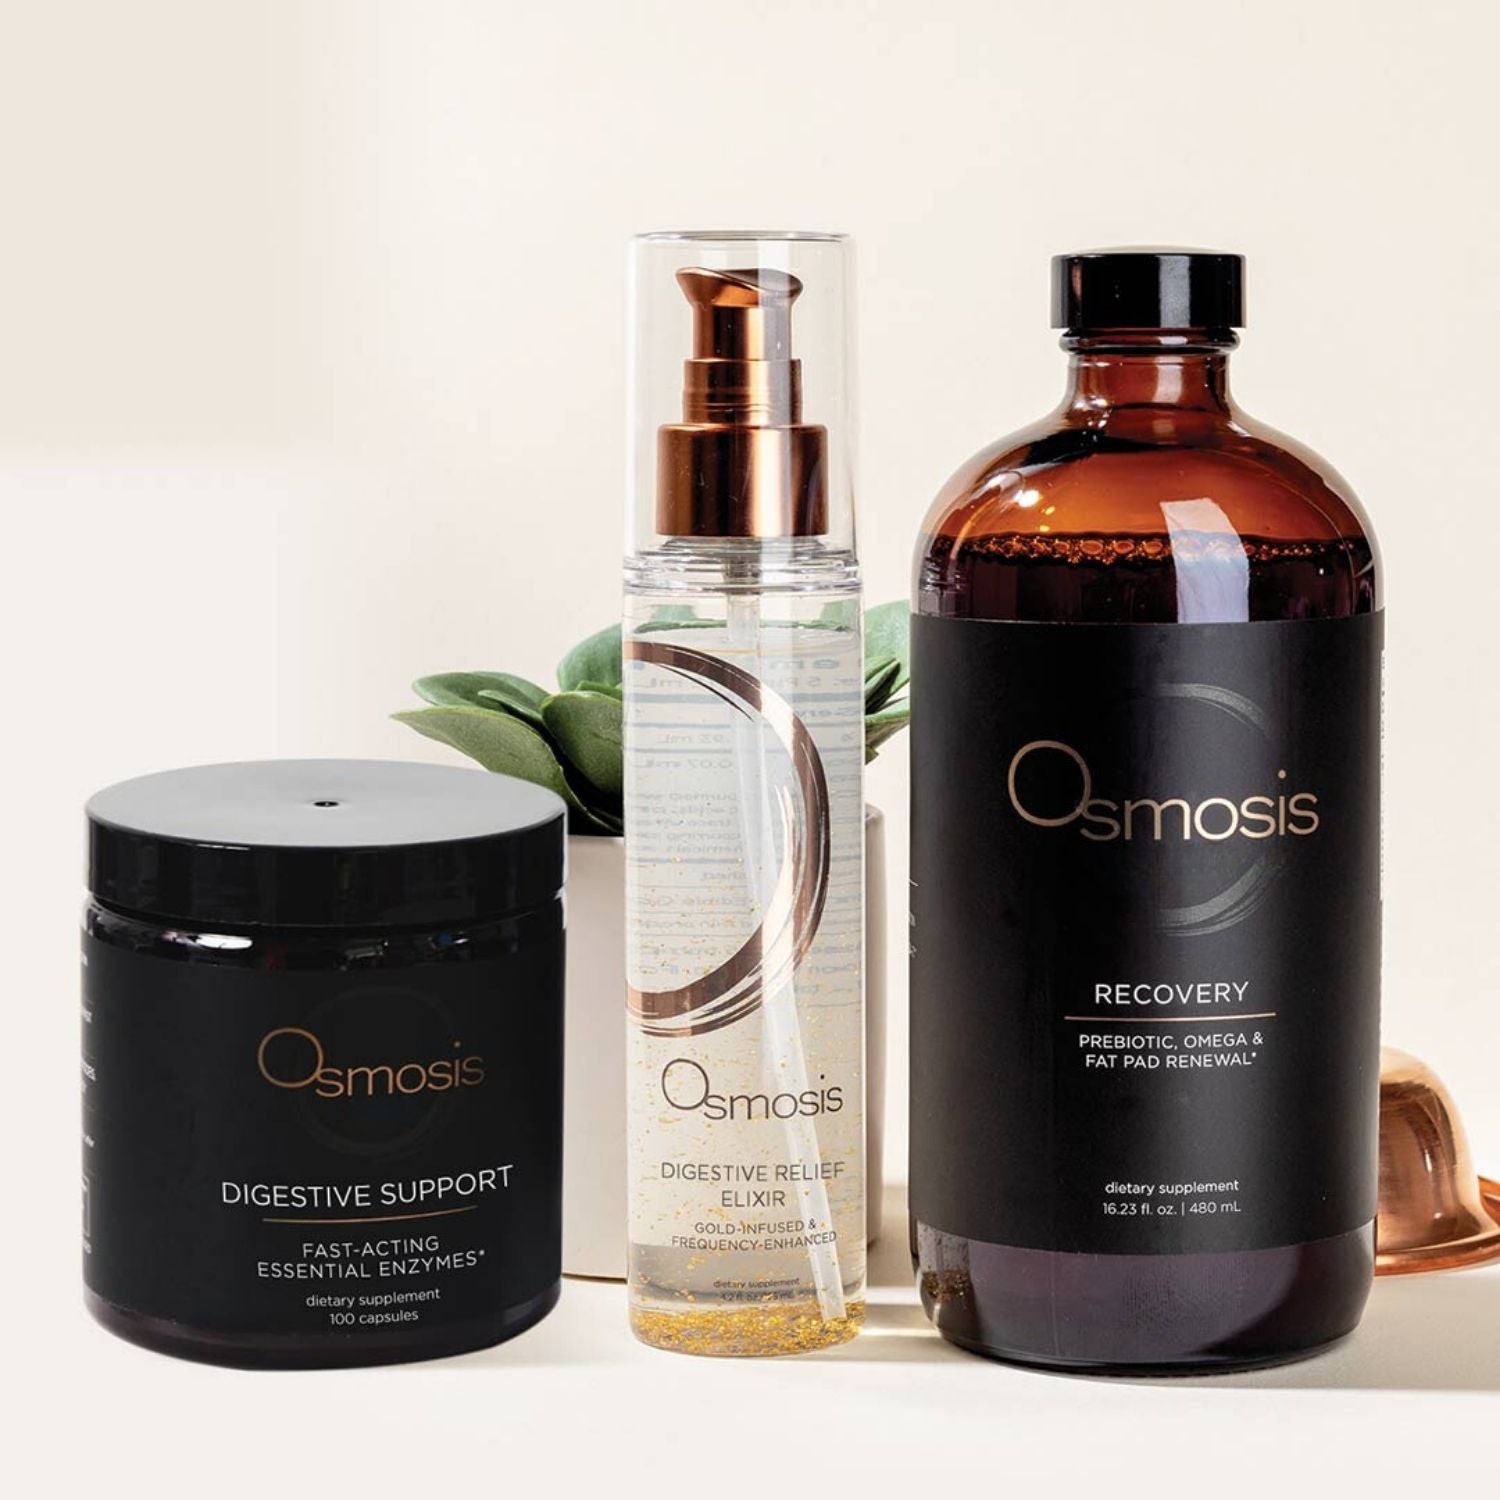 multiple products by osmosis beauty displayed together in a row